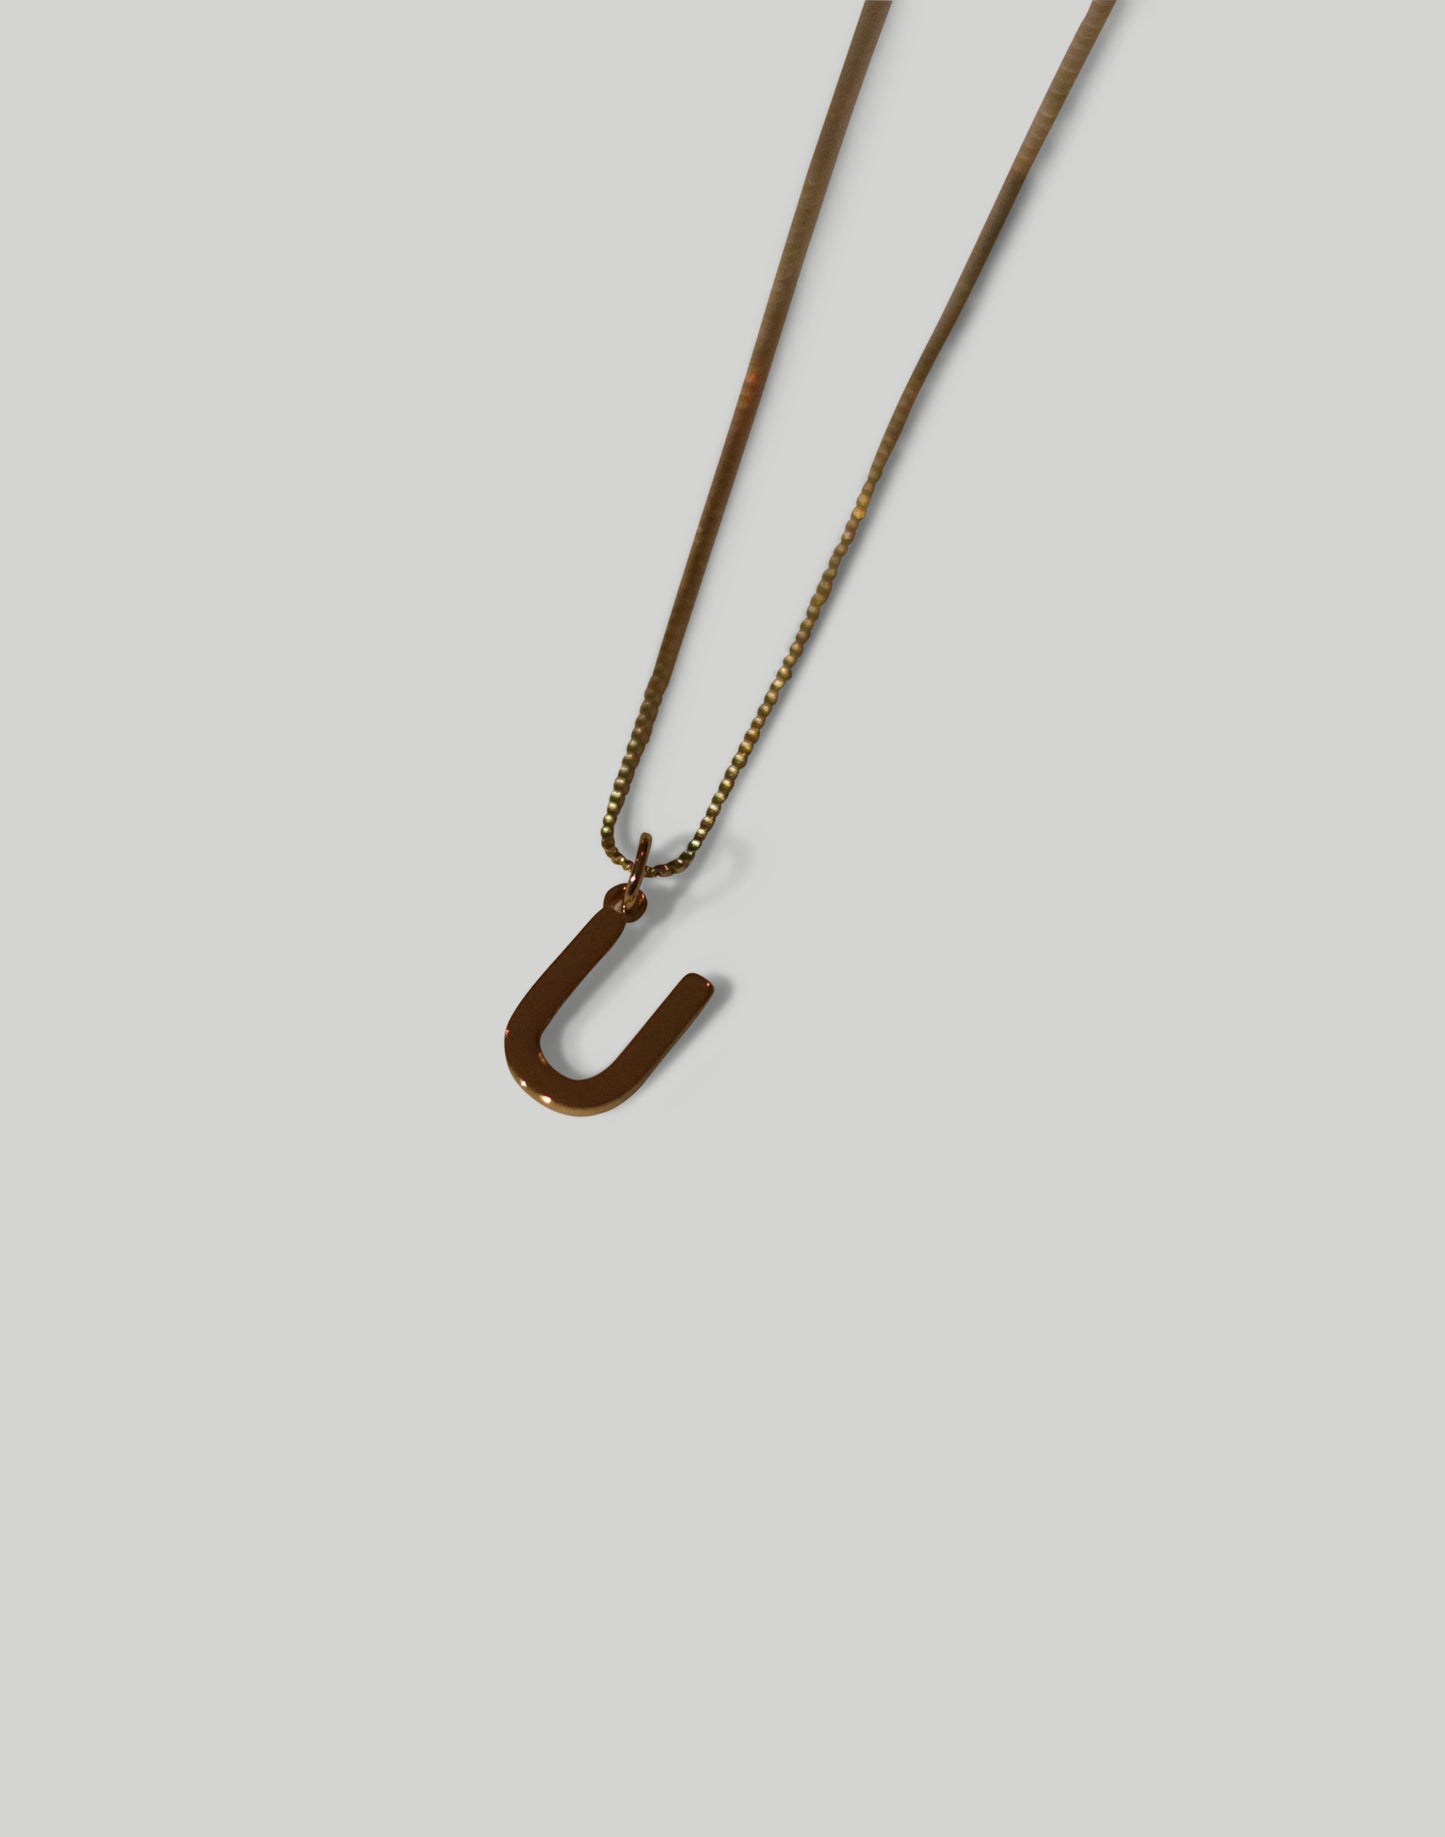 The Initial Minimalist Necklace